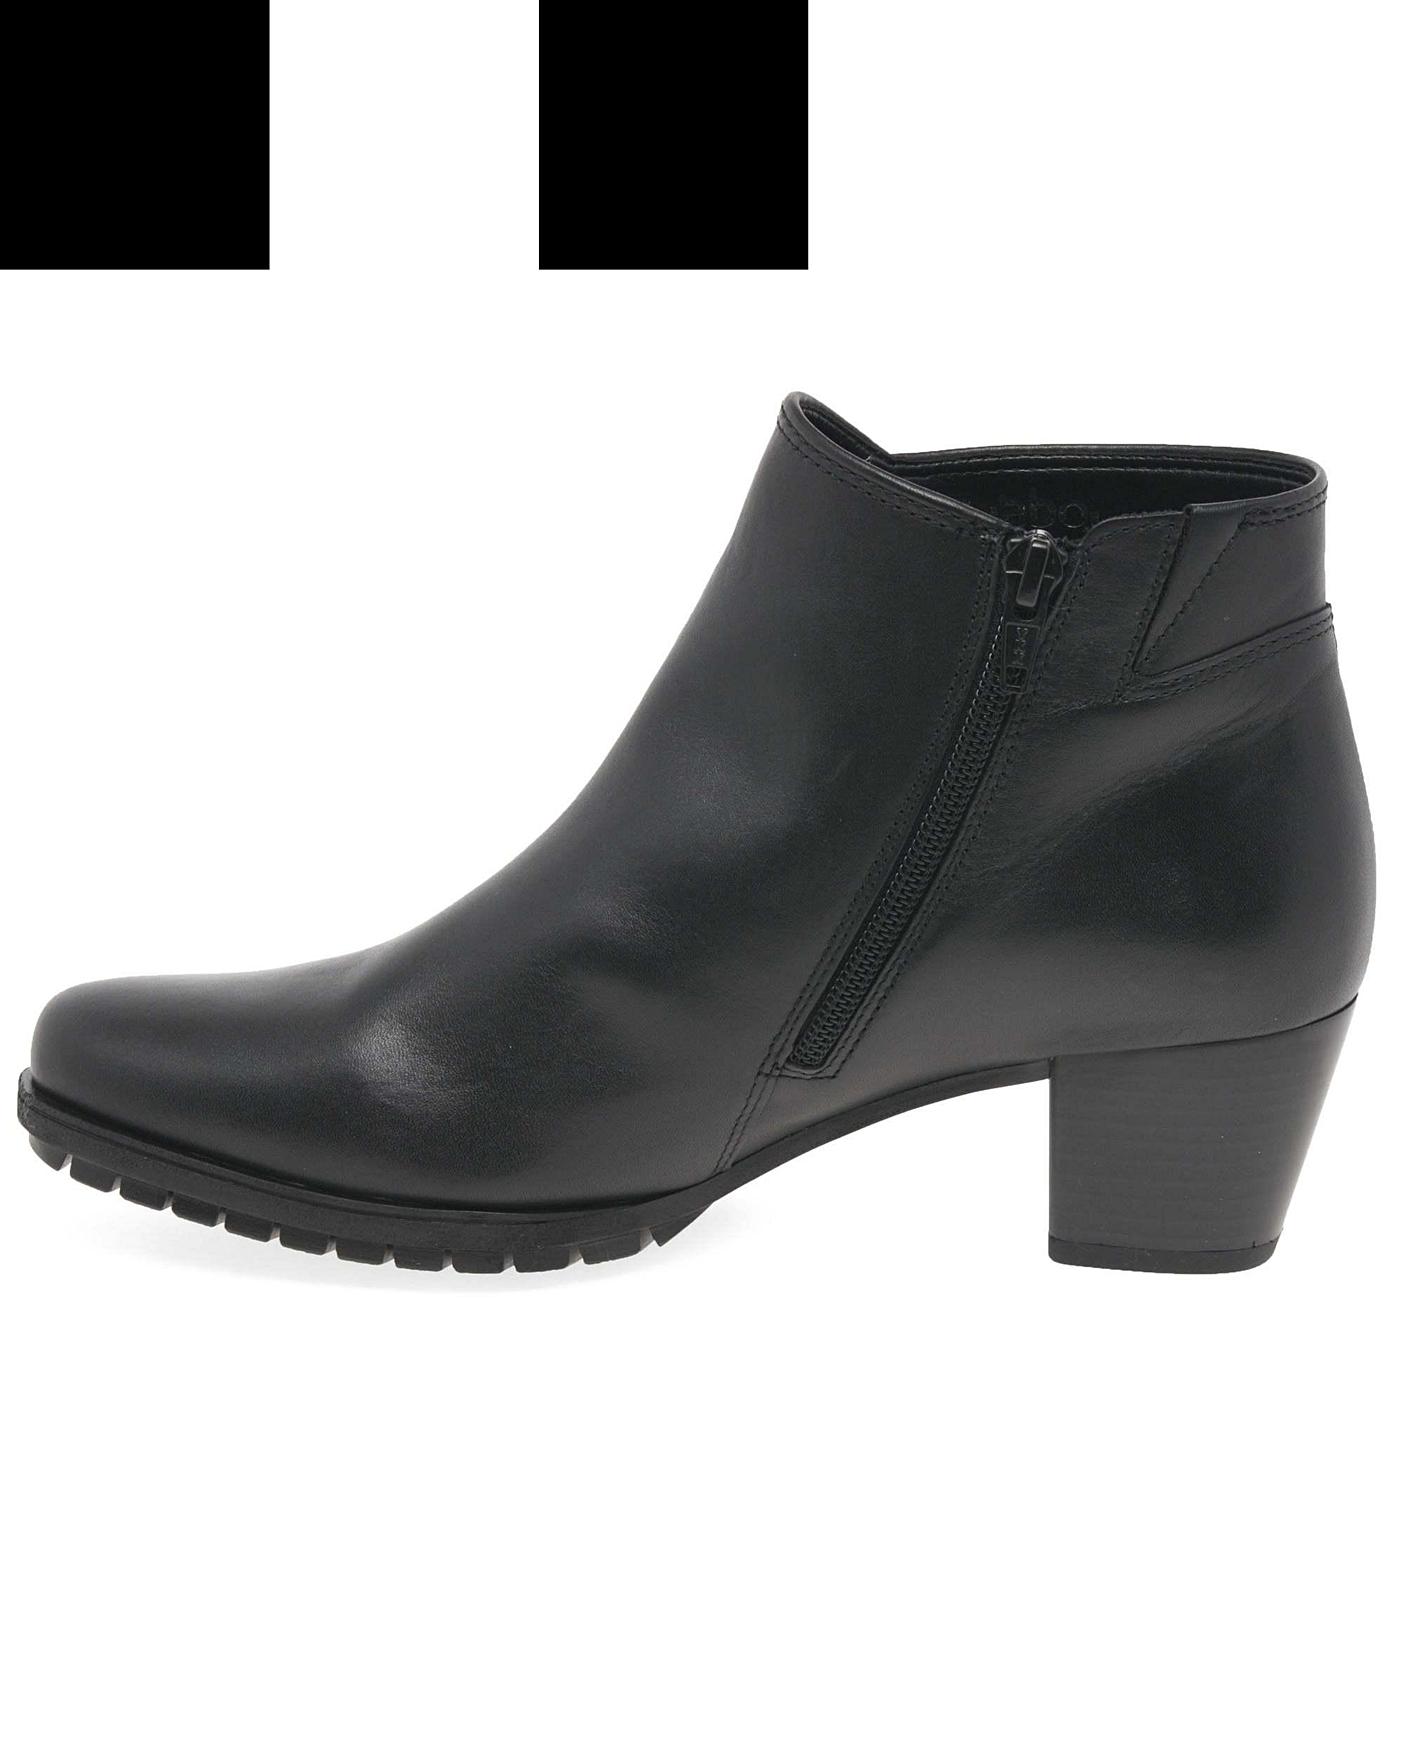 Gabor Olivetti Wide Fit Ankle Boots | J D Williams